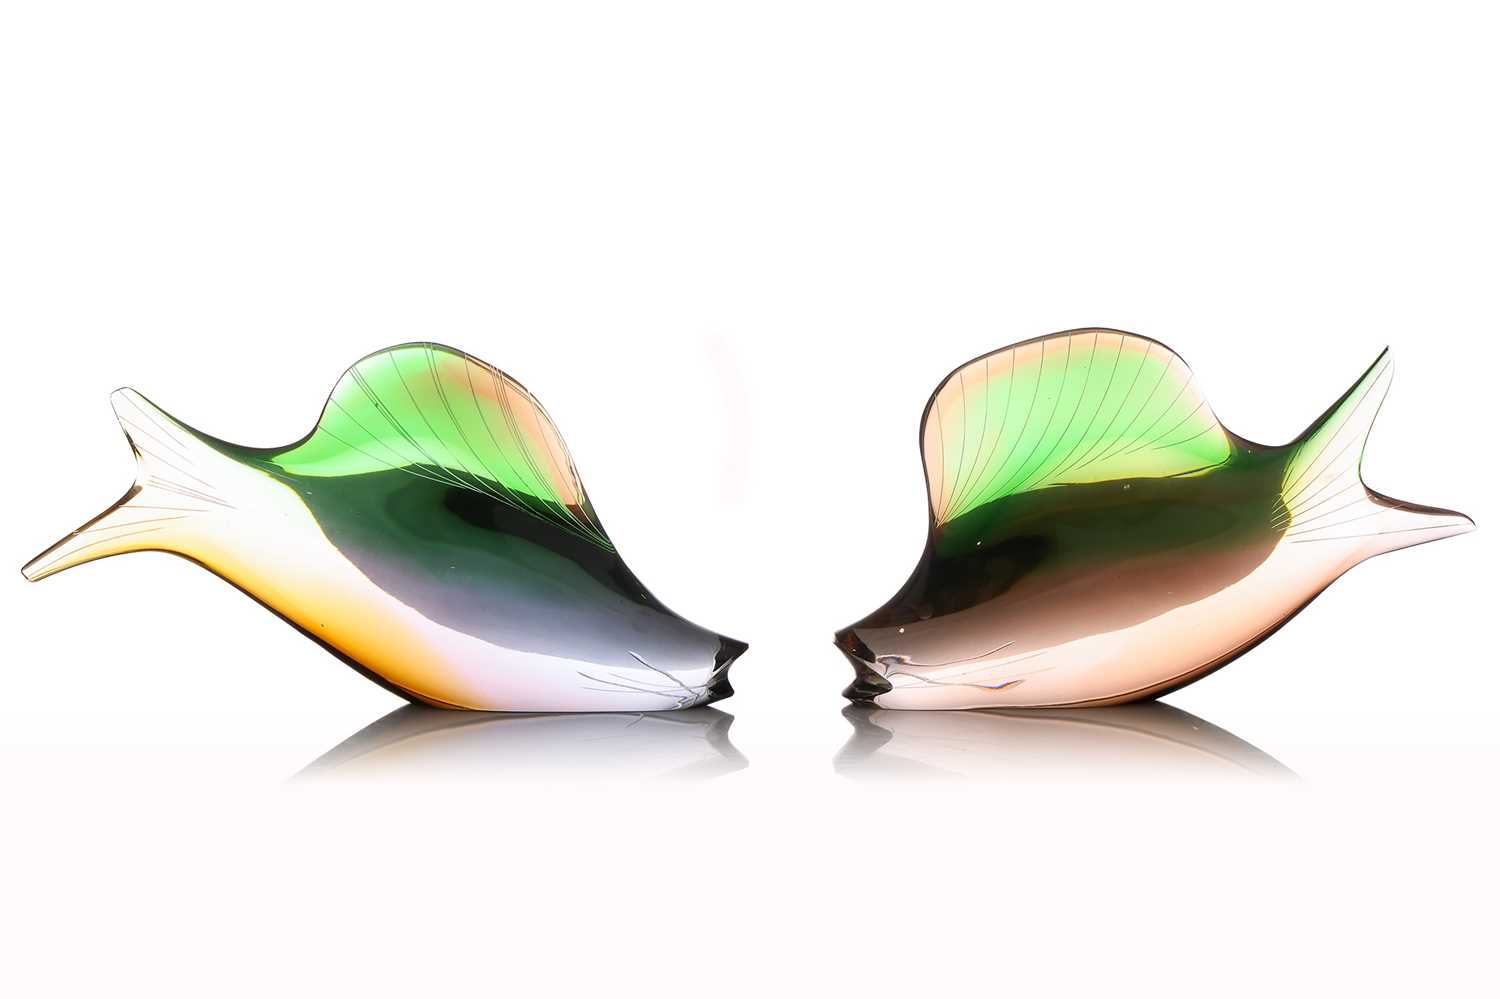 Rozinek and Honzik for Exbor (Czechoslovakia), two glass fish sculptures, of similar form in